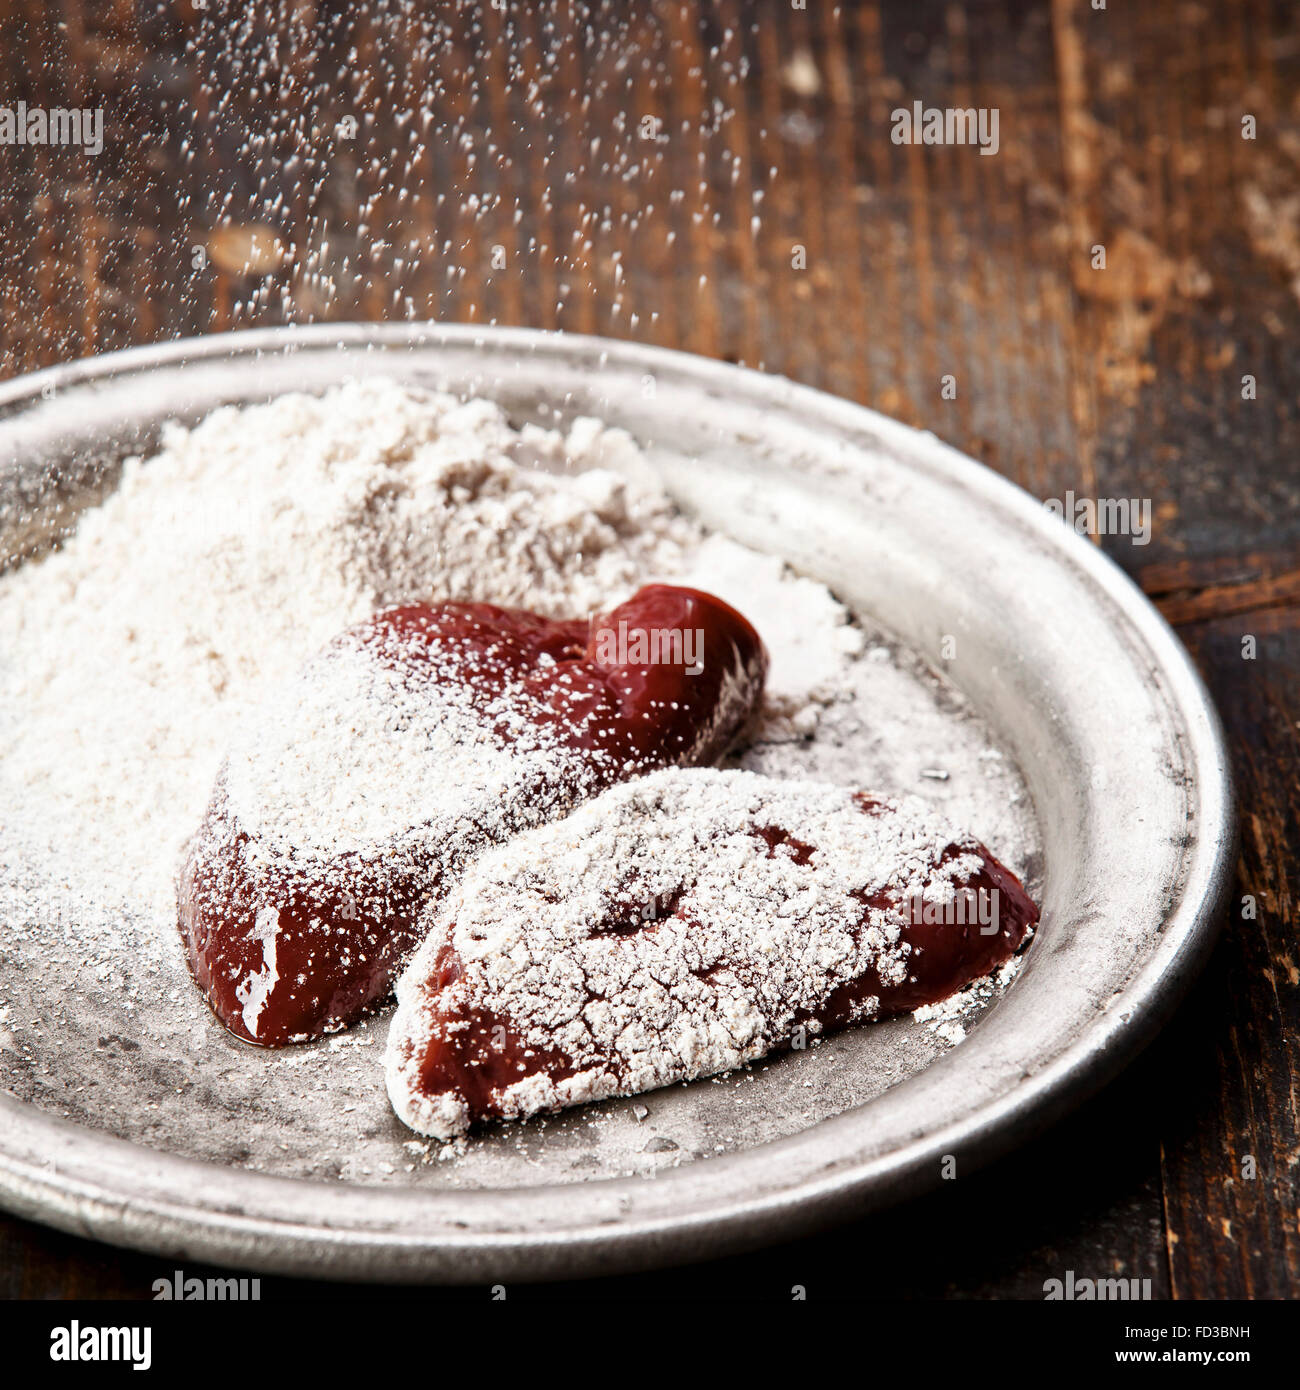 Raw liver sprinkled with flour Stock Photo